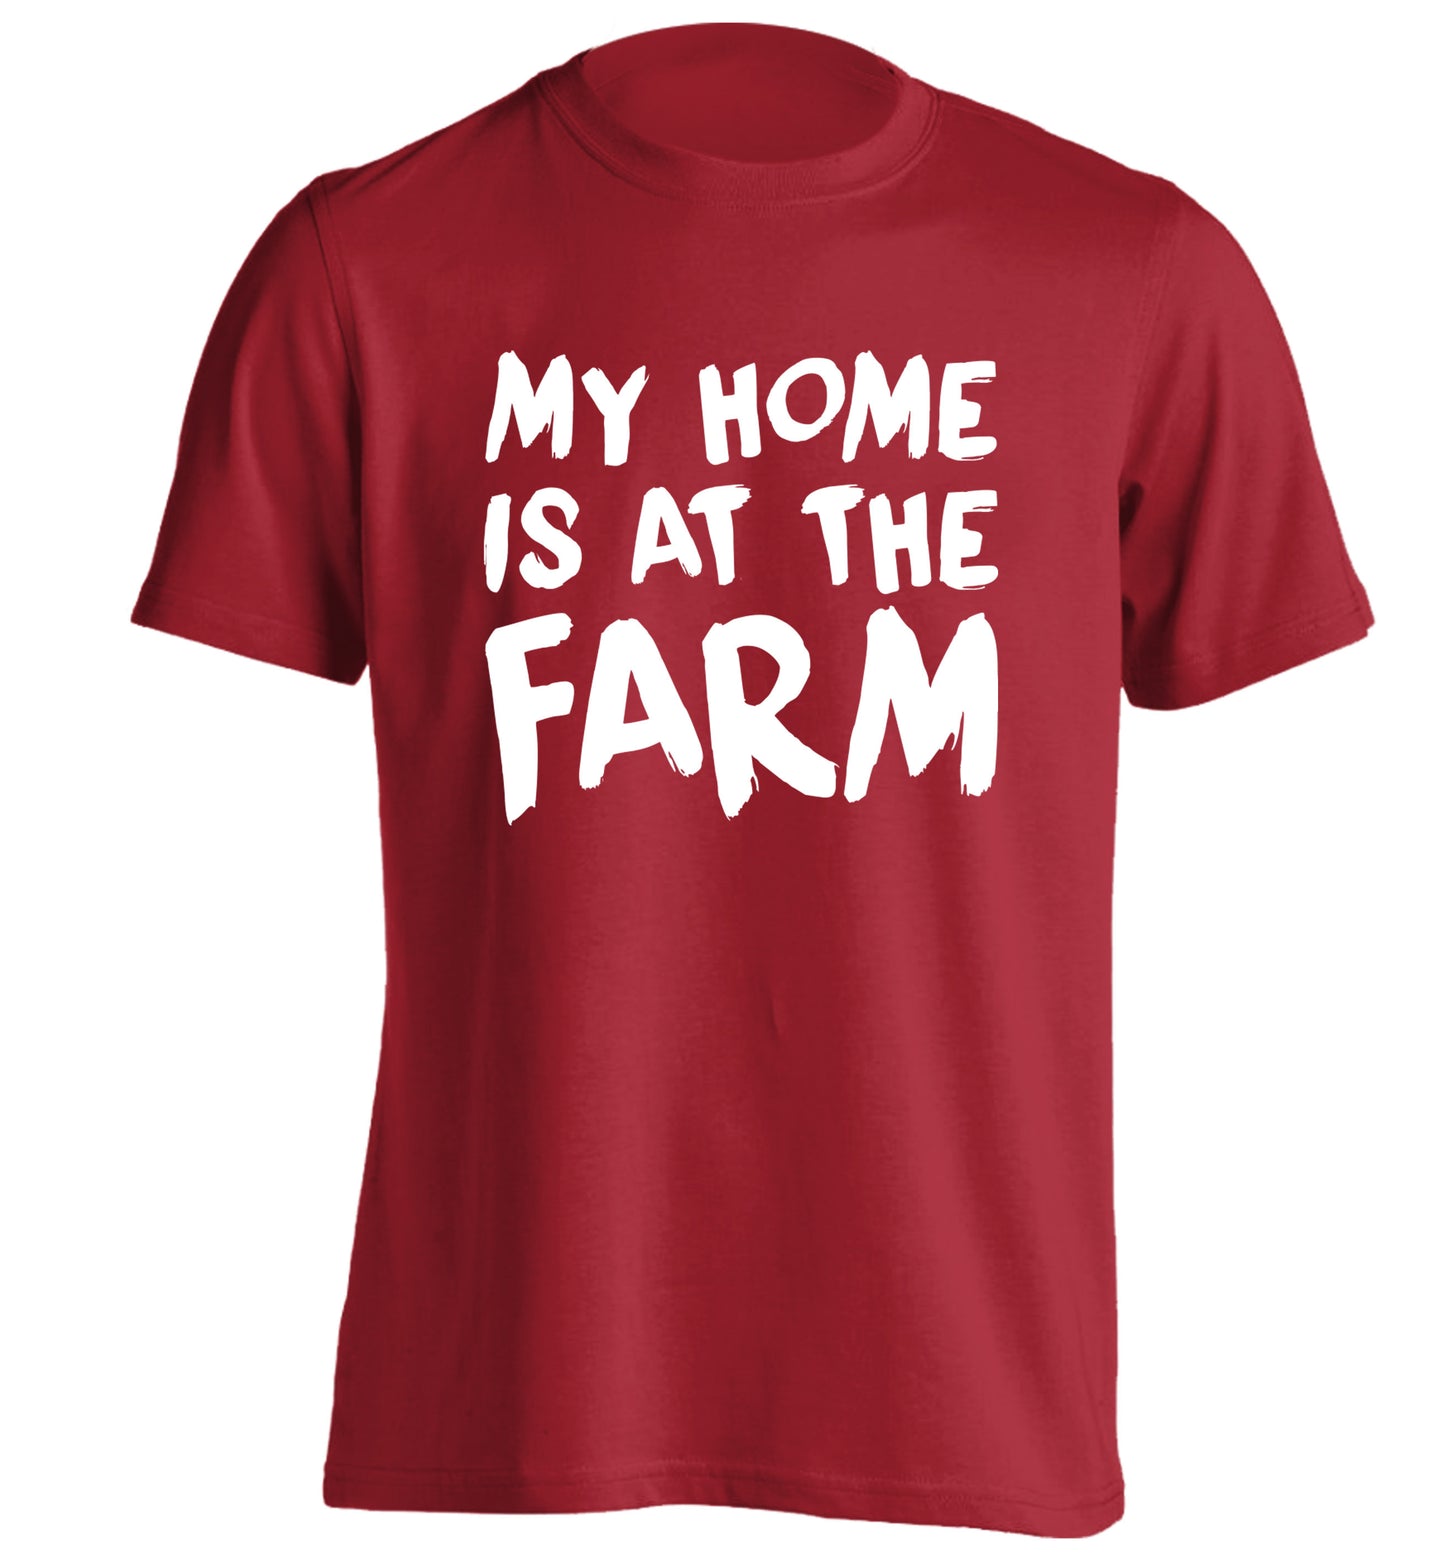 My home is at the farm adults unisex red Tshirt 2XL